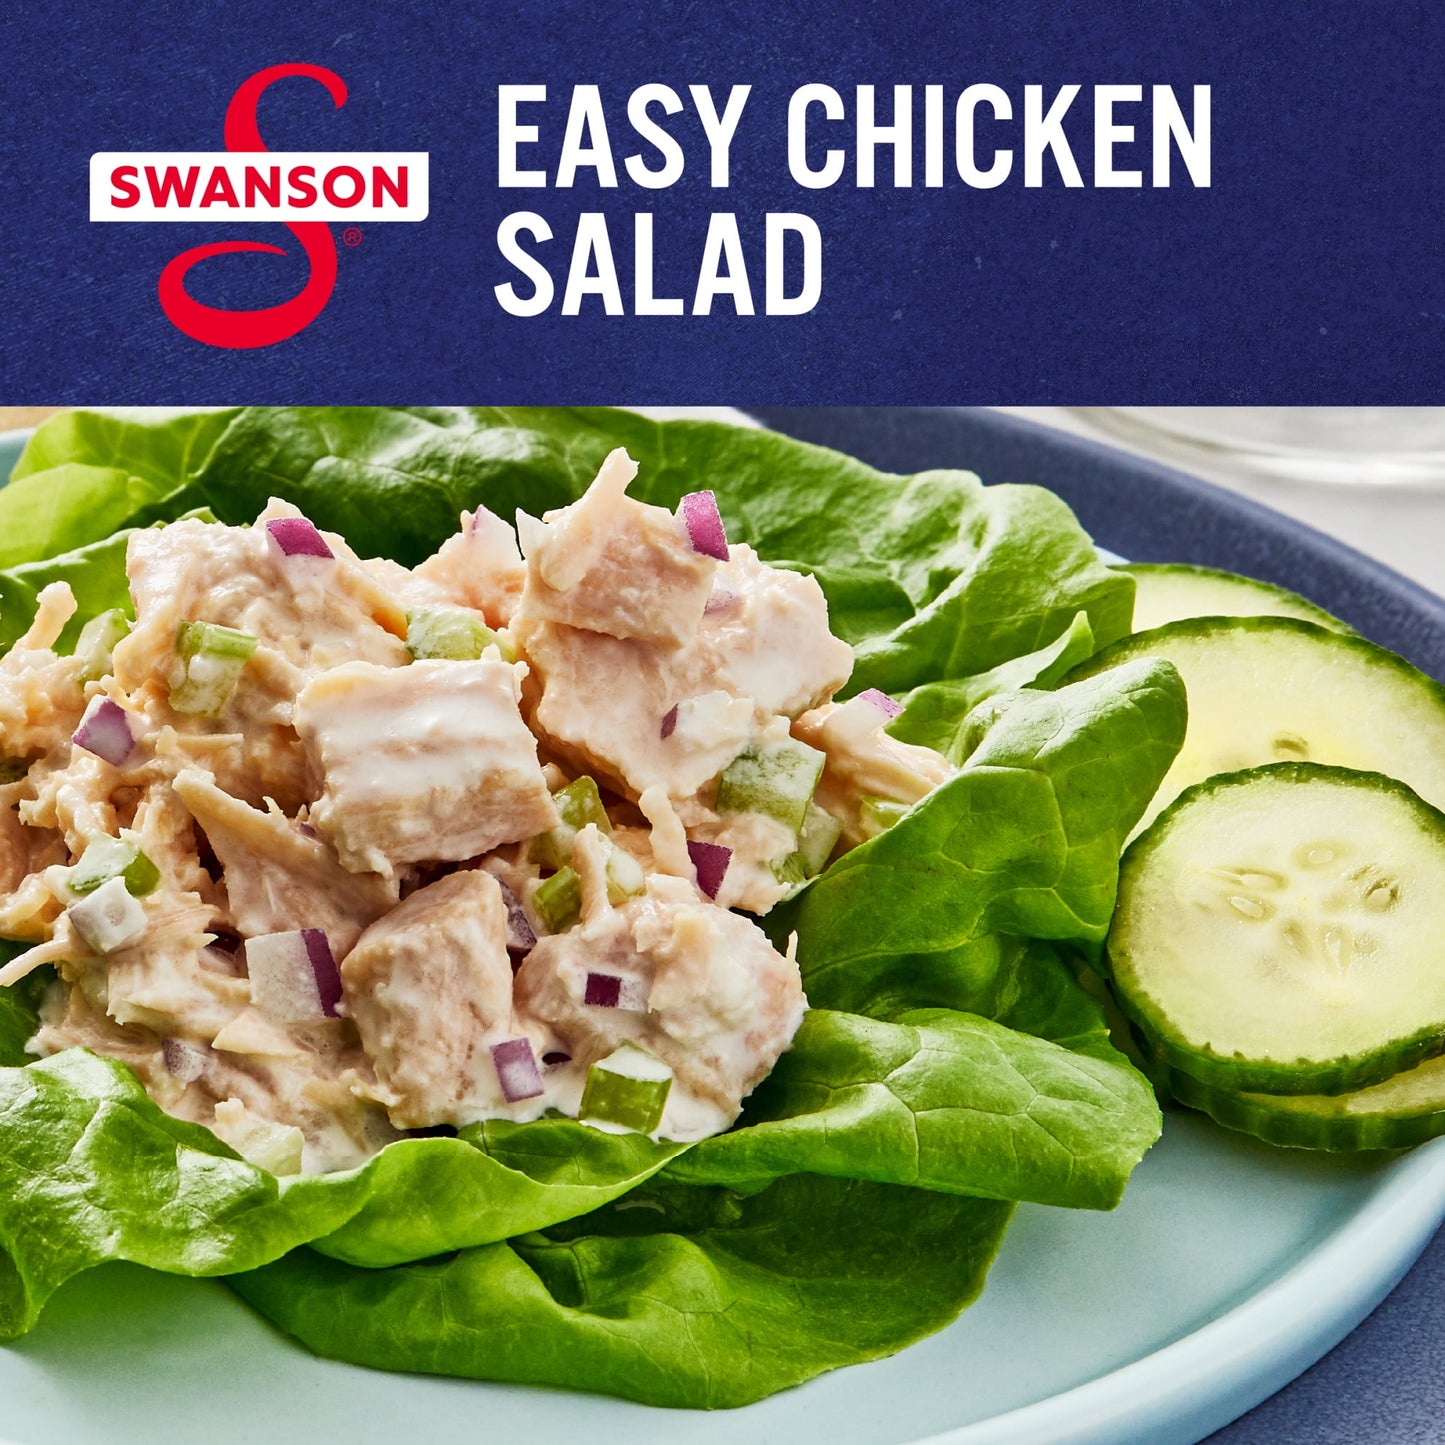 Swanson White Premium Chunk Canned Chicken Breast in Water, Fully Cooked Chicken, 4.5 oz Can